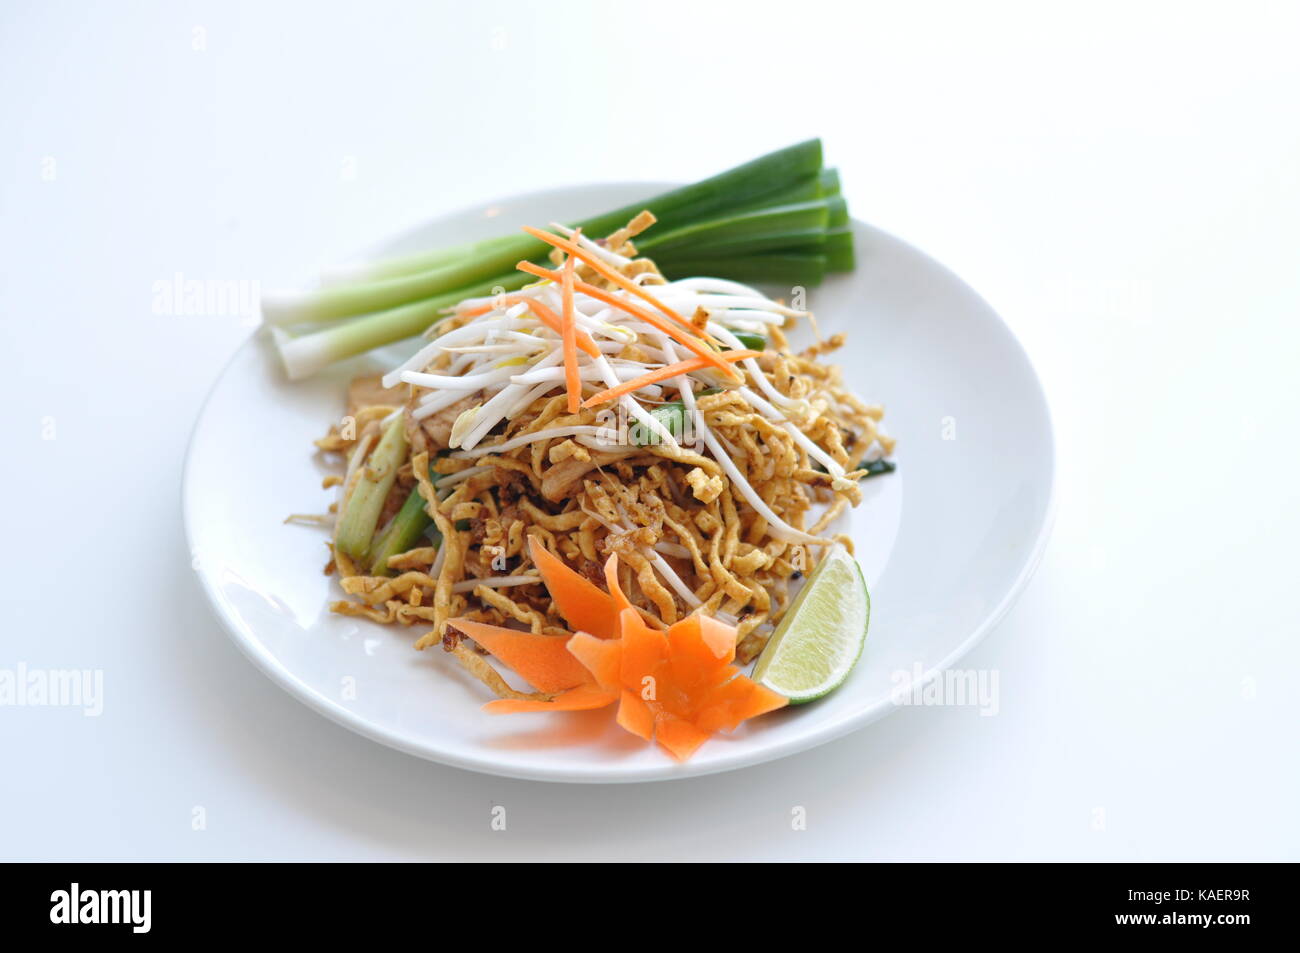 Crispy Chicken Pad Thai. Rice noodles stir-fried with egg, scallions, bean sprouts and ground peanuts topped with crispy chicken. Stock Photo